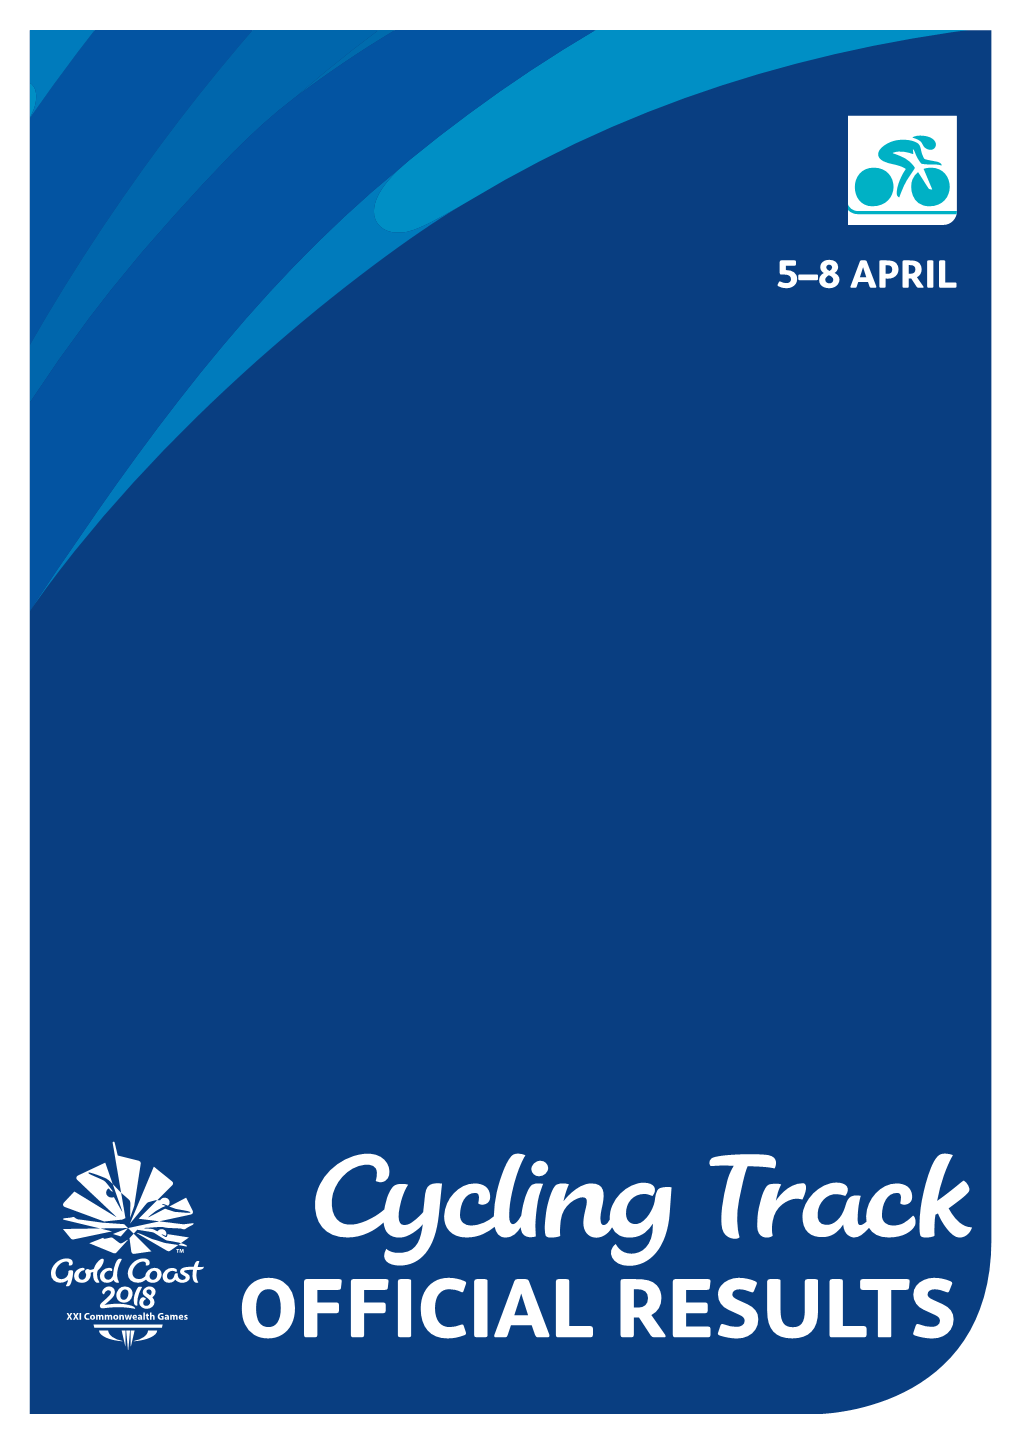 Cycling Track OFFICIAL RESULTS Anna Meares Velodrome Cycling Track